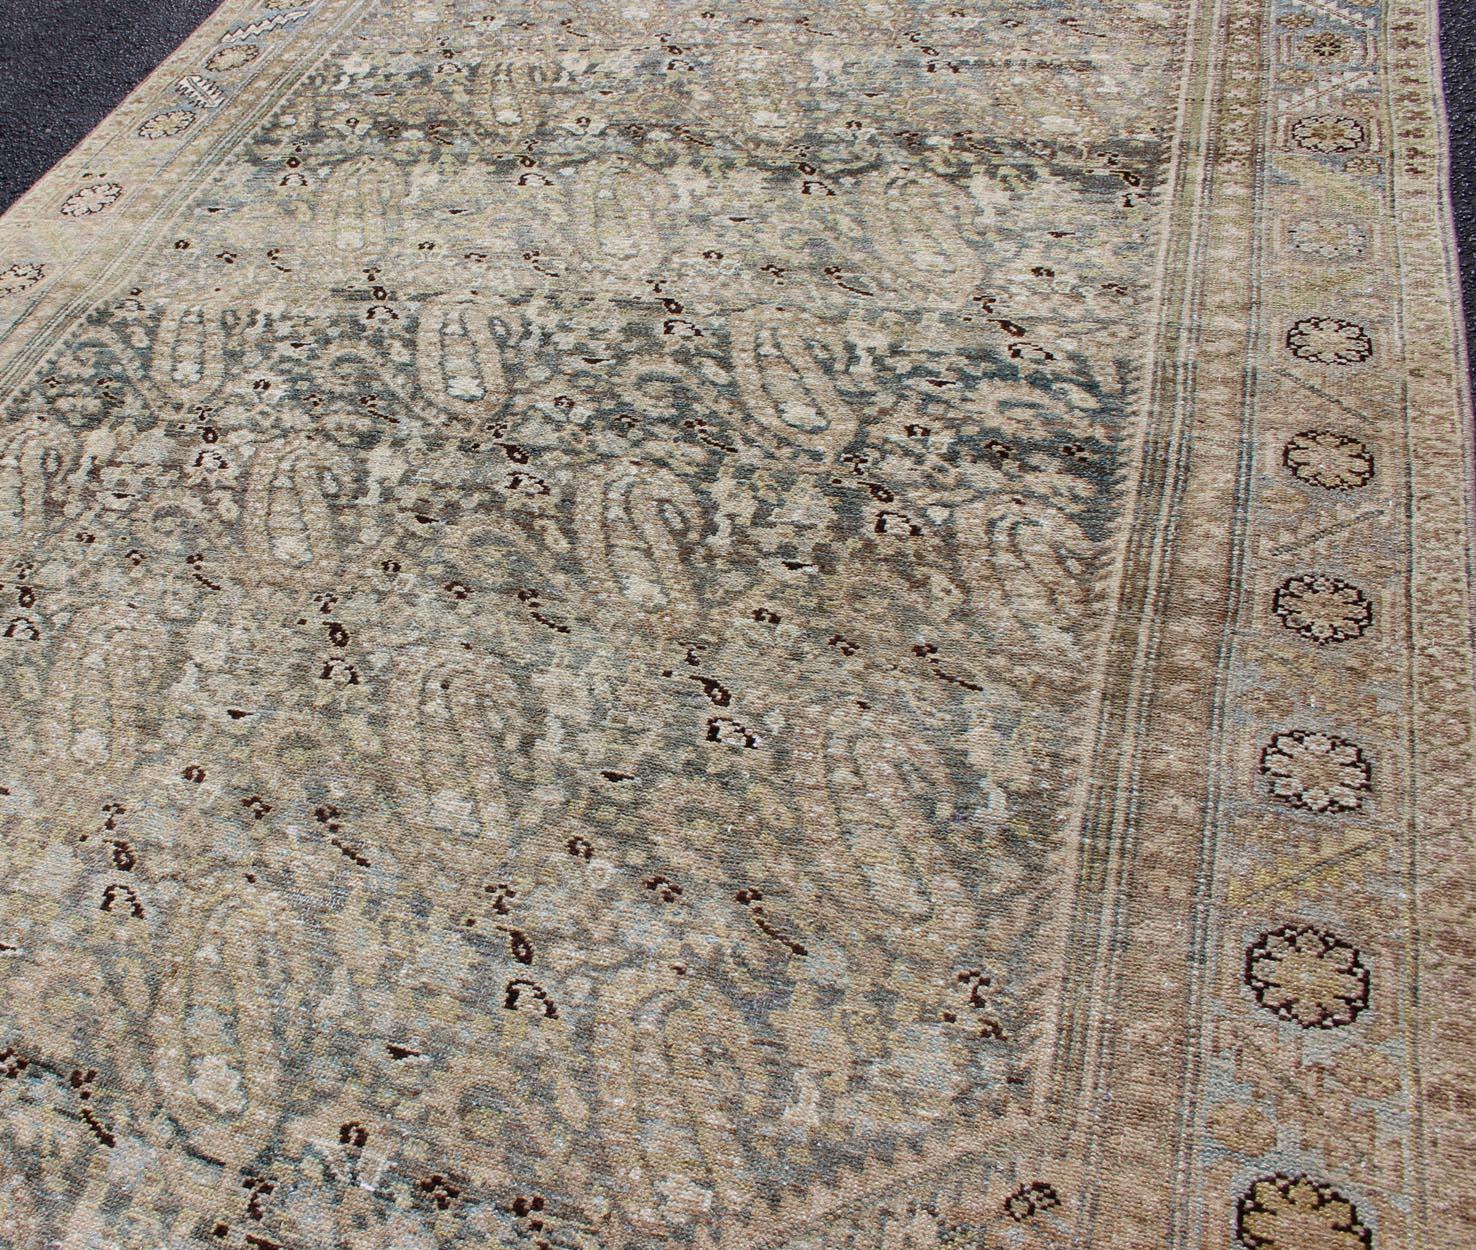 Persian Gray and Earth Tones Paisley Design Gallery Malayer Rug with Paisley Design